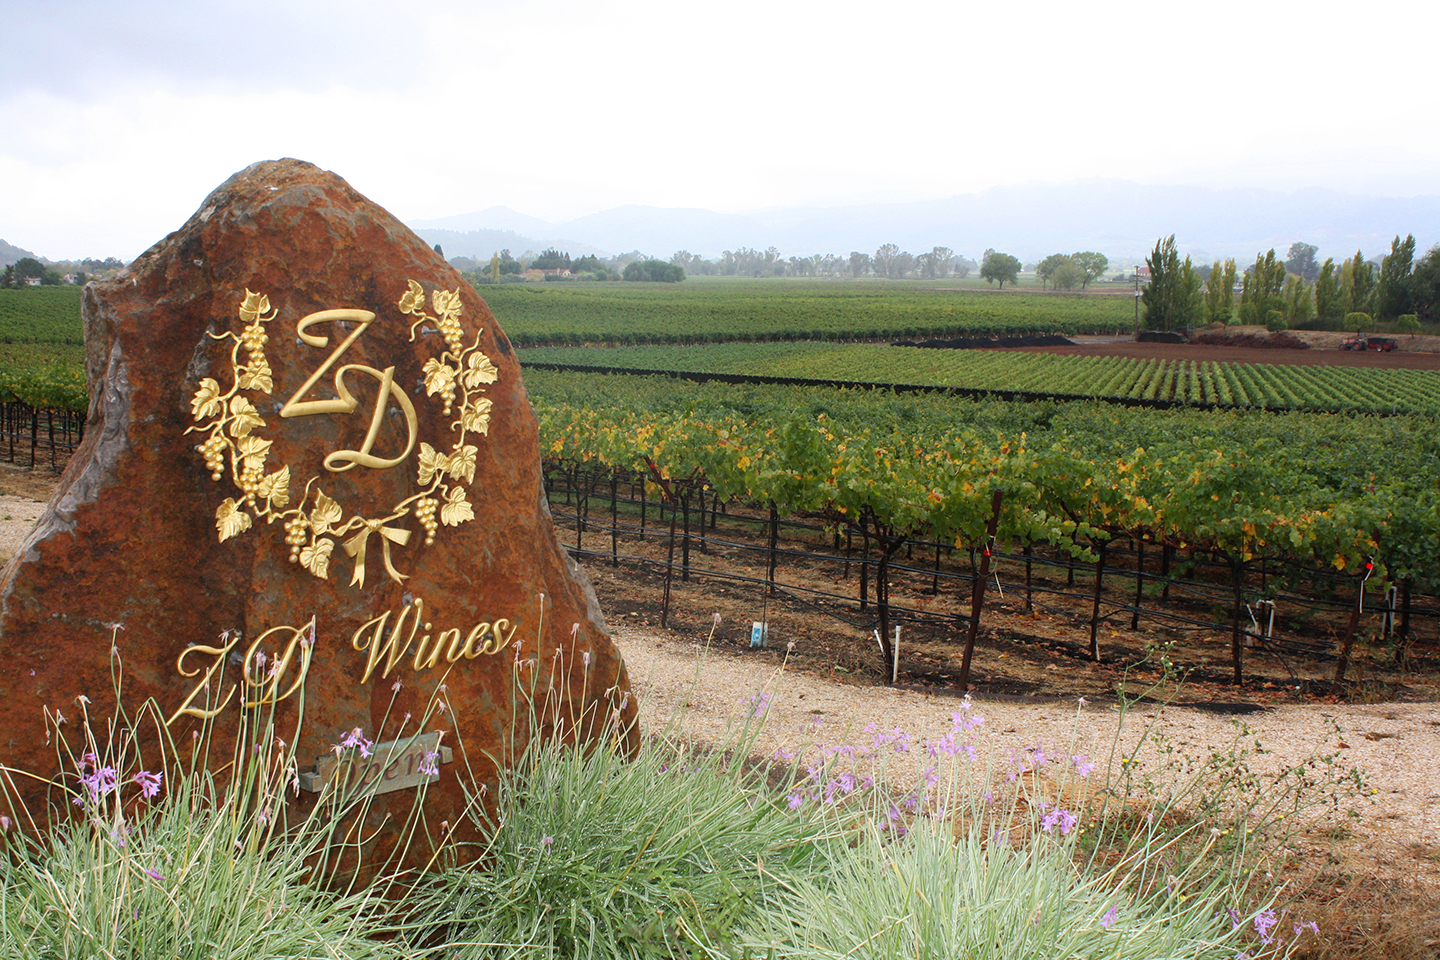 Visiting ZD Wines in Rutherford is a top-notch Napa Valley experience. ZD’s world-class wines, hospitable staff and amazing views are among the best in the Napa Valley.